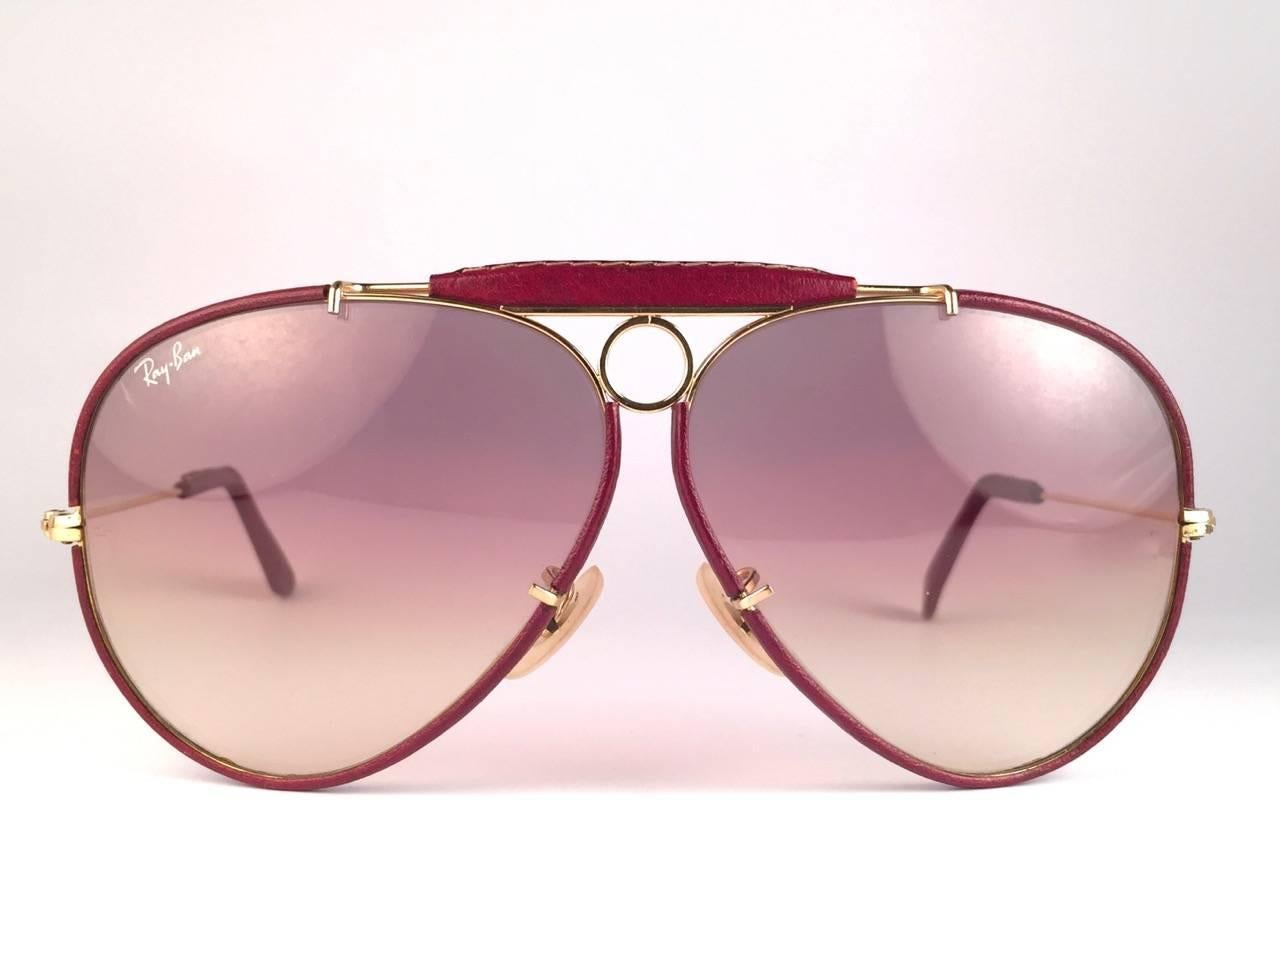 New Vintage Ray Ban Shooter 62 mm burgundy leather with rose gradient lenses with Ray Ban logo. 
B&L etched in the lenses, so mid 1970's. 
Comes with its original Ray Ban B&L case.
Rare and hard to find!